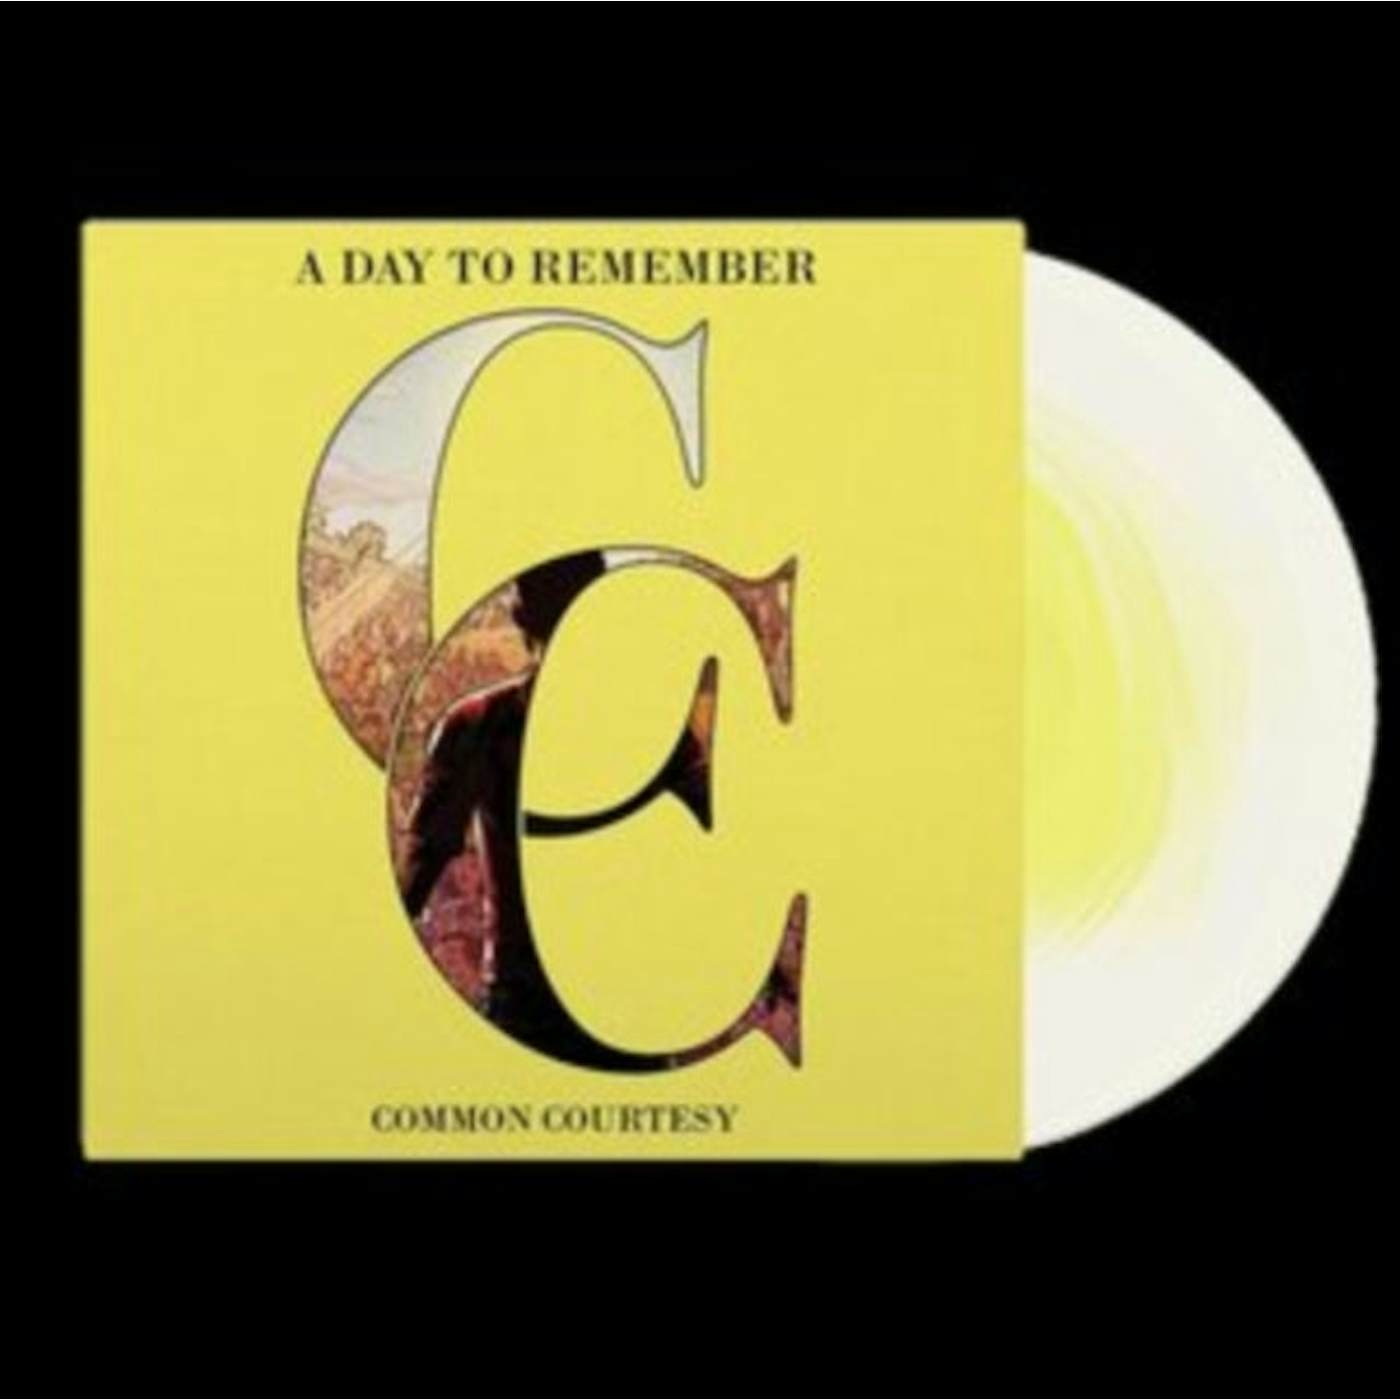 A Day To Remember LP - Common Courtesy (Vinyl)